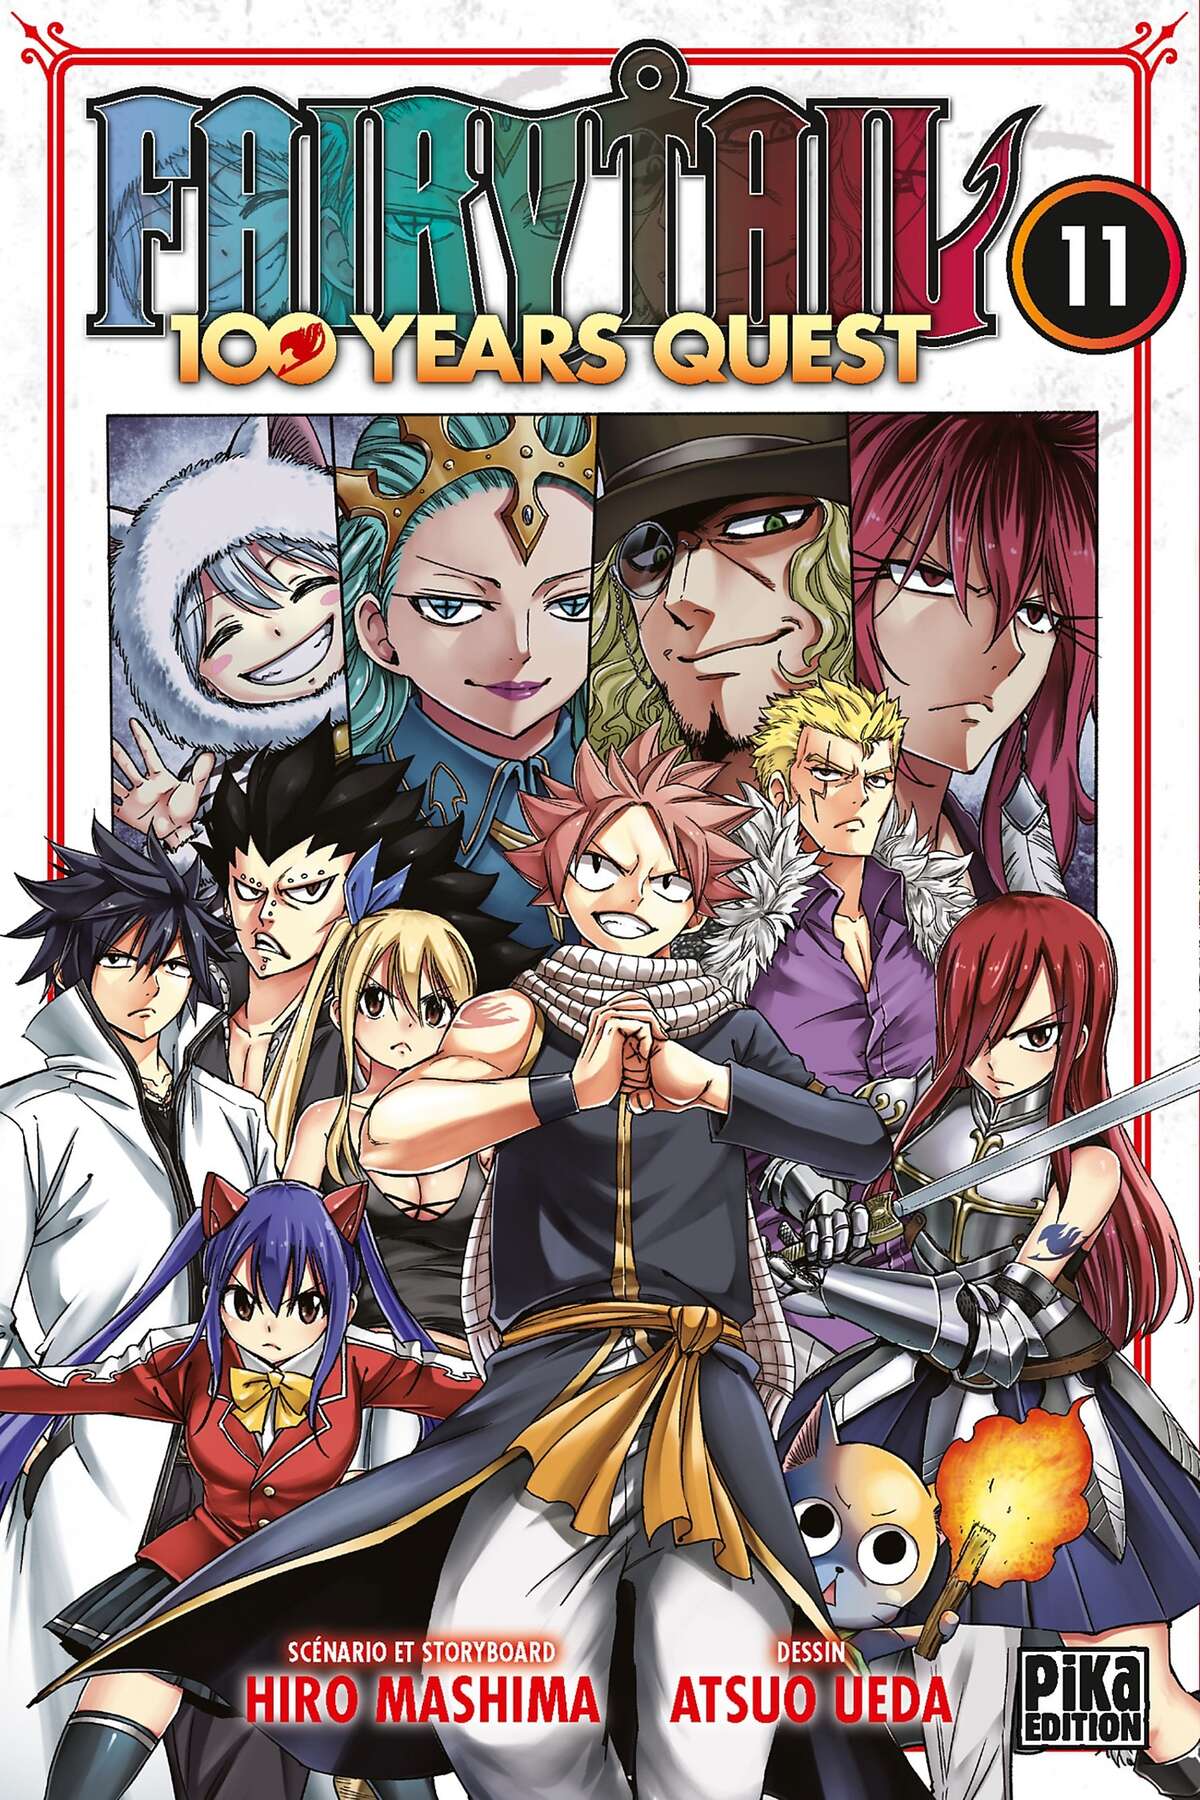 Fairy Tail – 100 Years Quest Volume 11 page 1